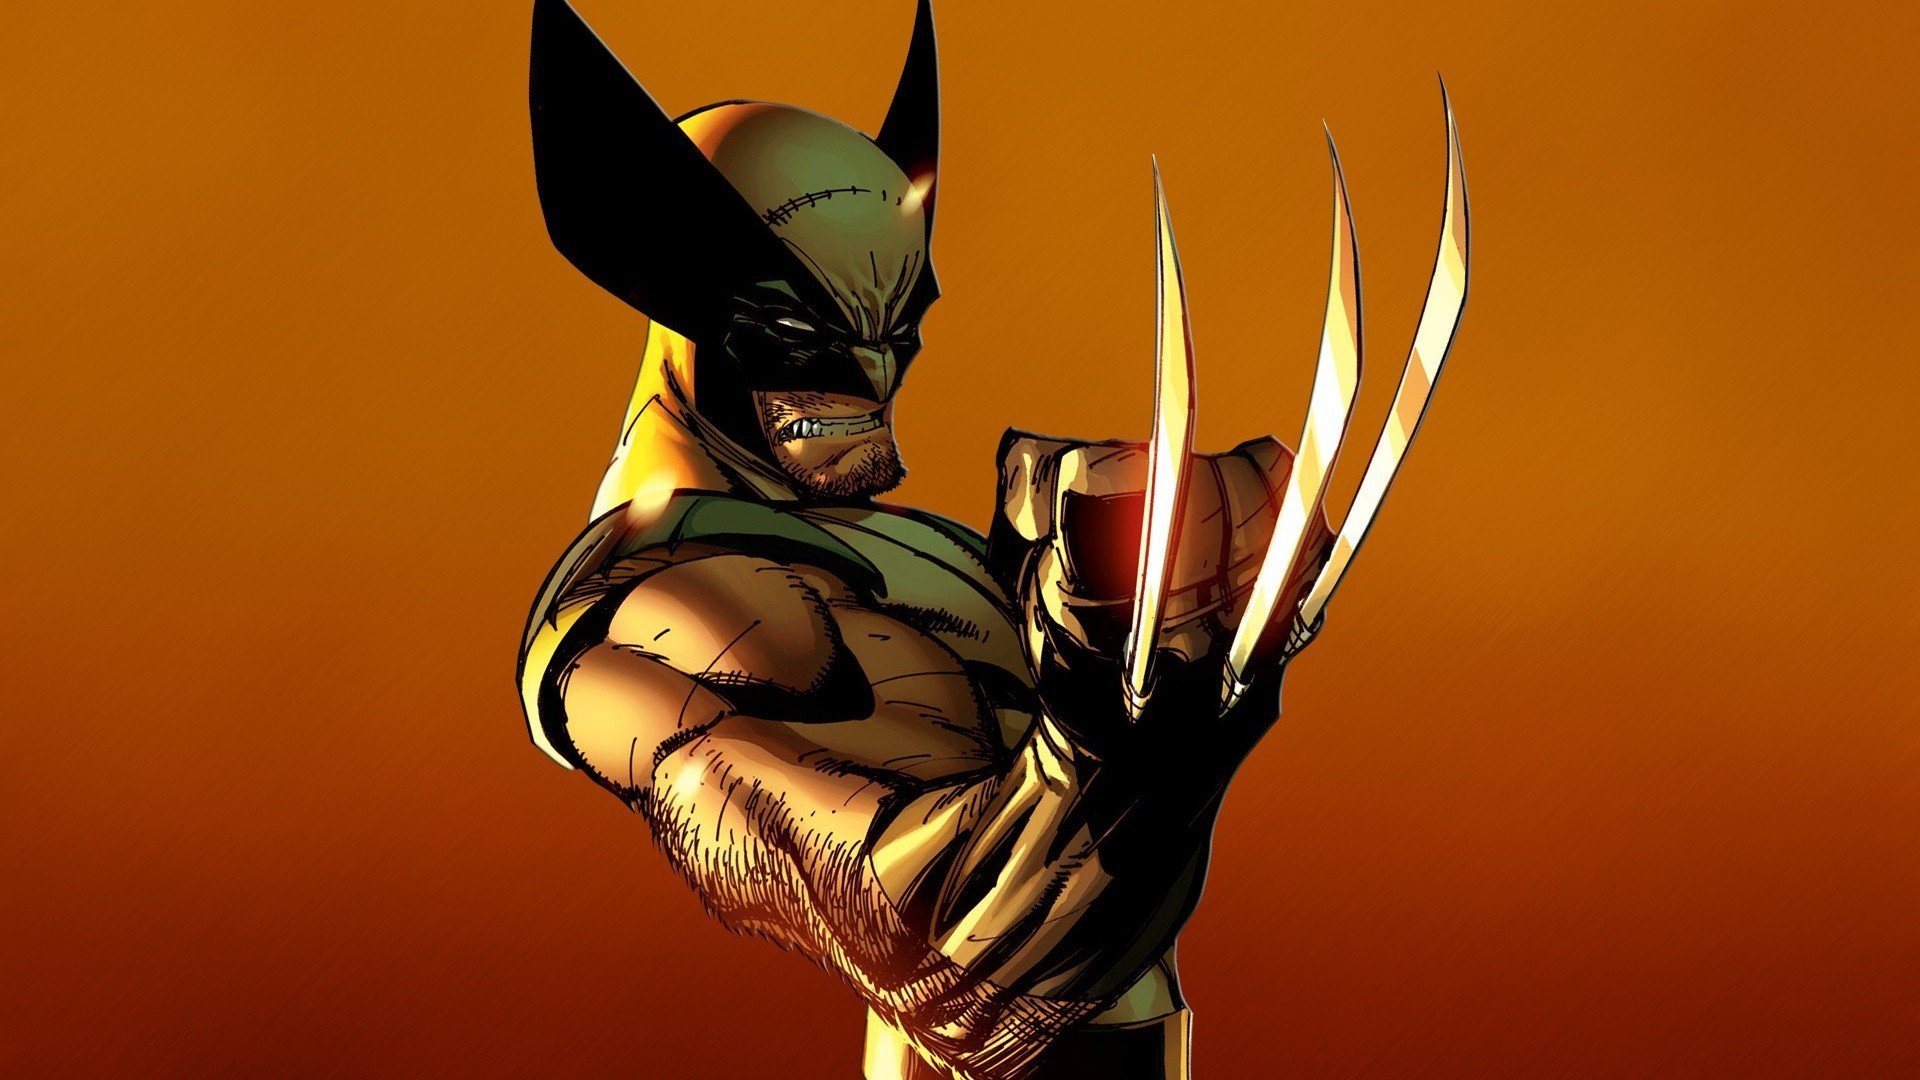 wolverine 4k wallpapers for your desktop or mobile screen free and easy to download wolverine 4k wallpapers for your